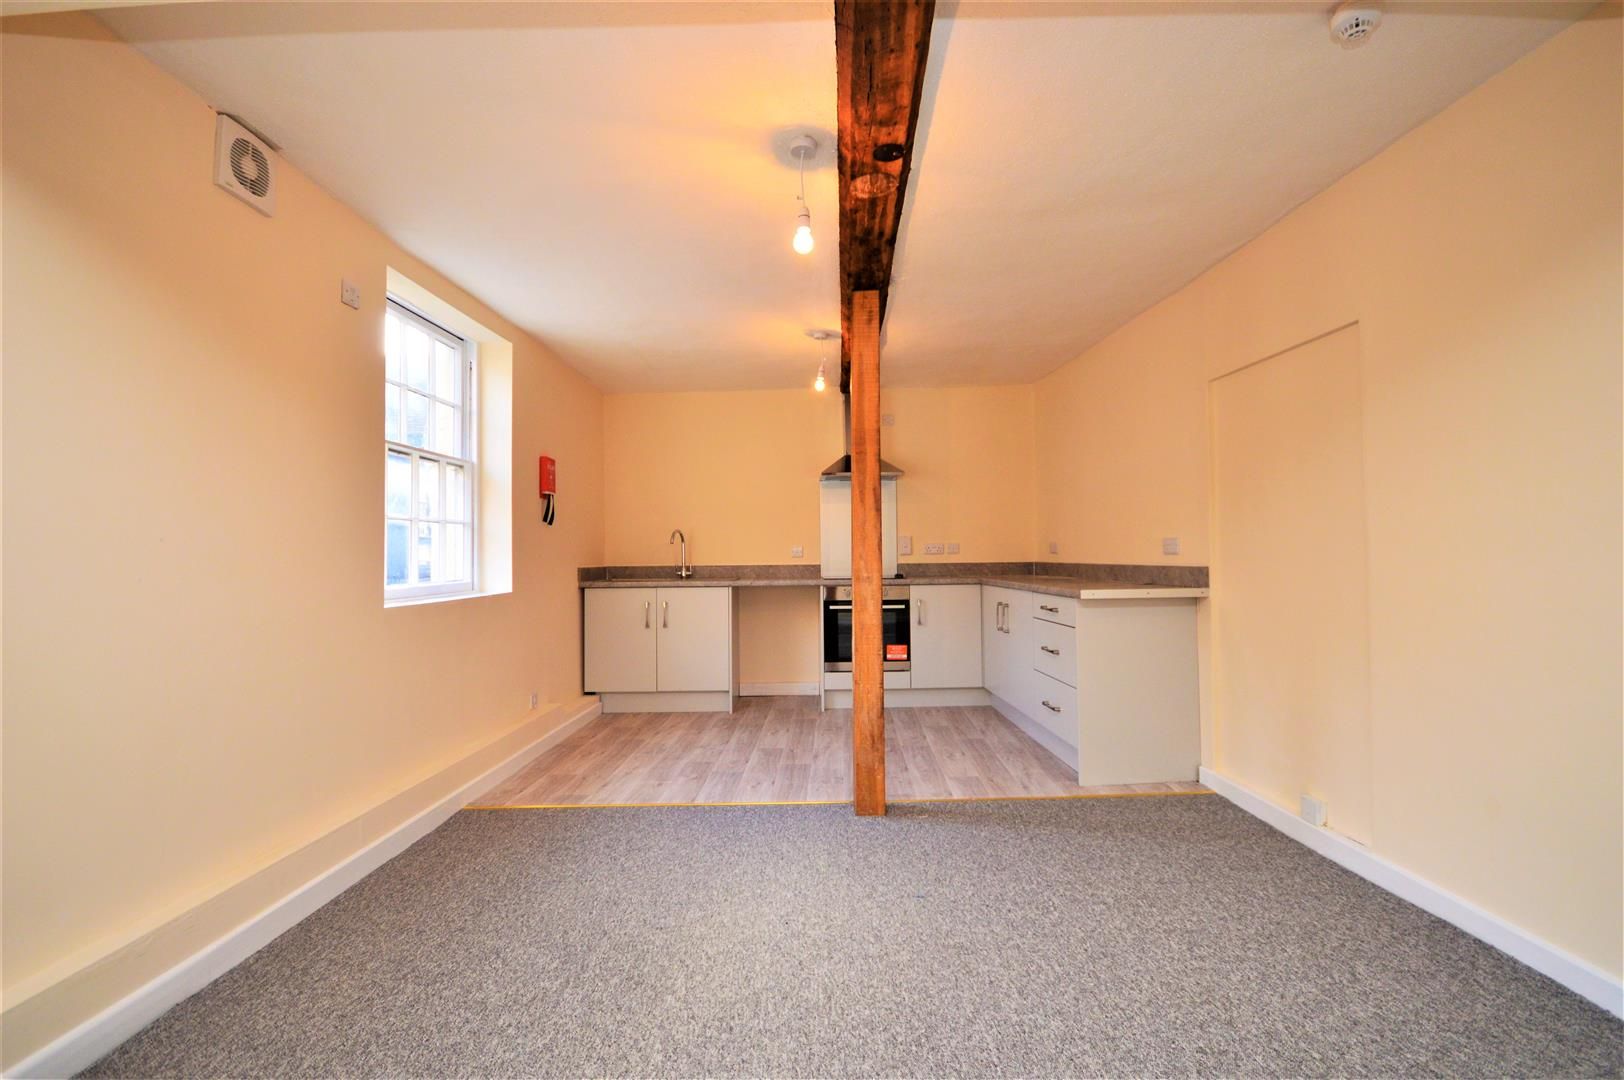 2 bed  for sale in Hereford 8